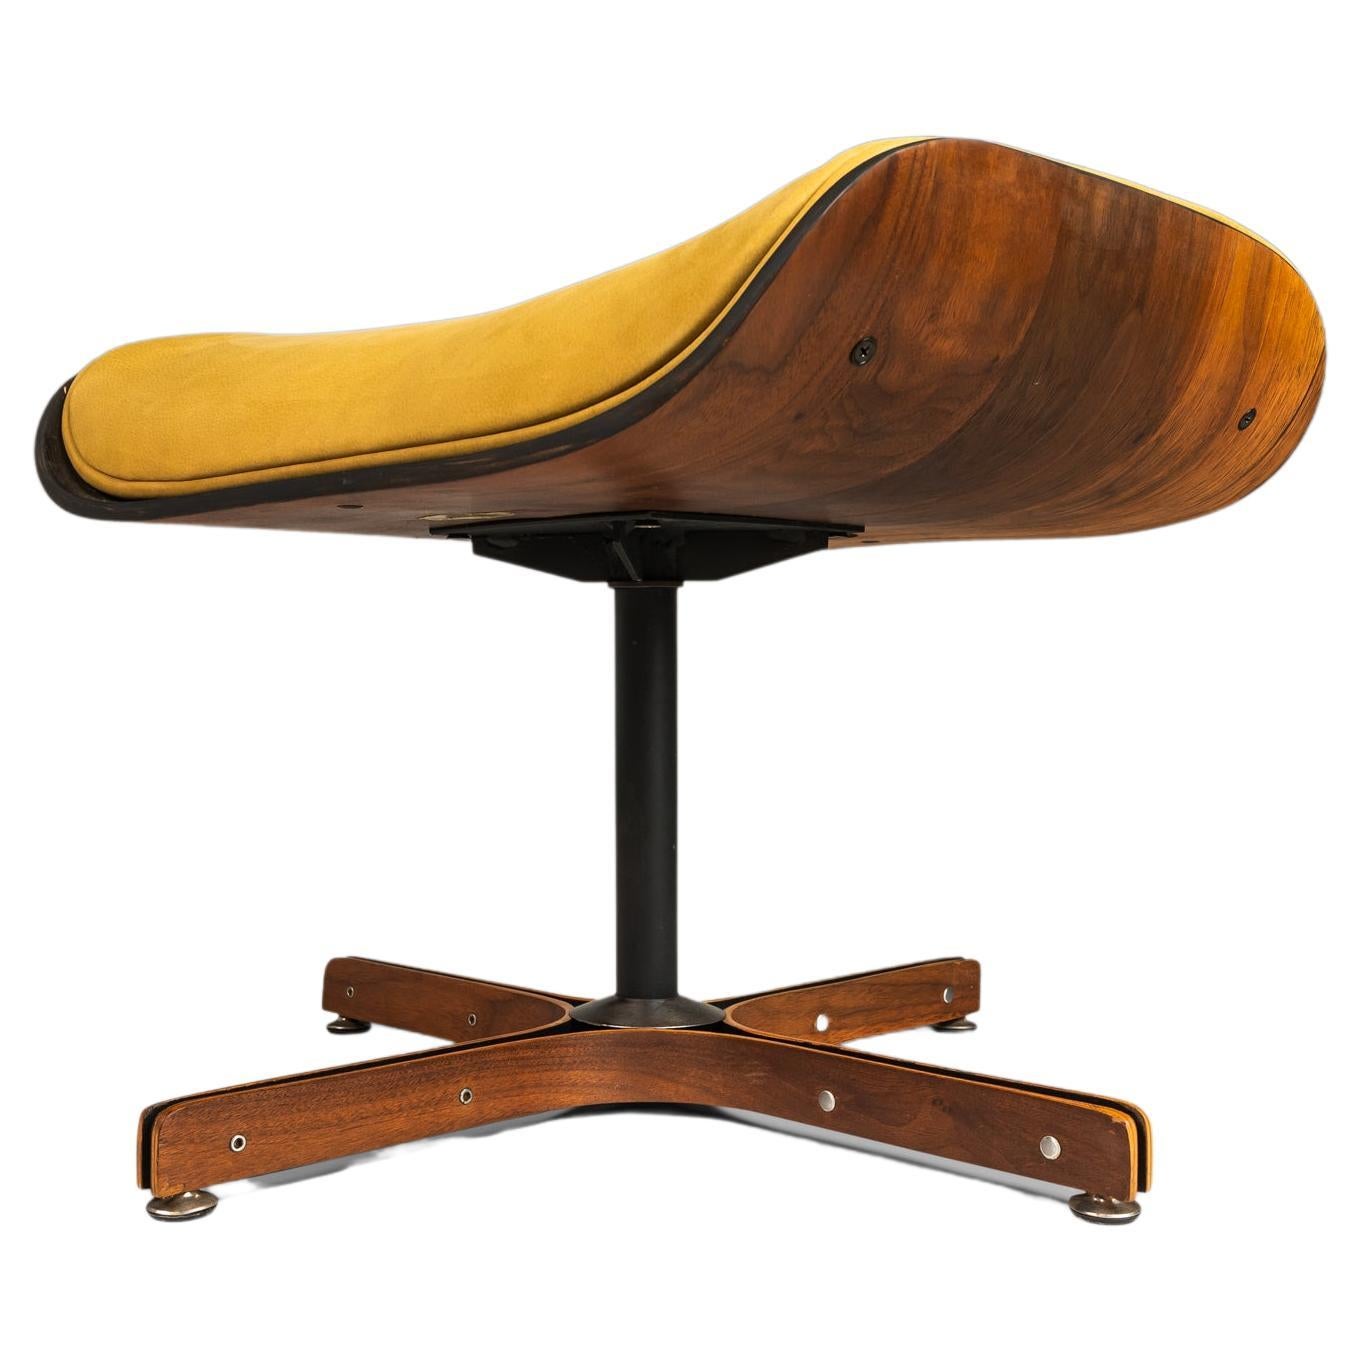 Bentwood Ottoman That Pairs Well w/ Mr. Chair Lounger by George Mulhauser, 1960s